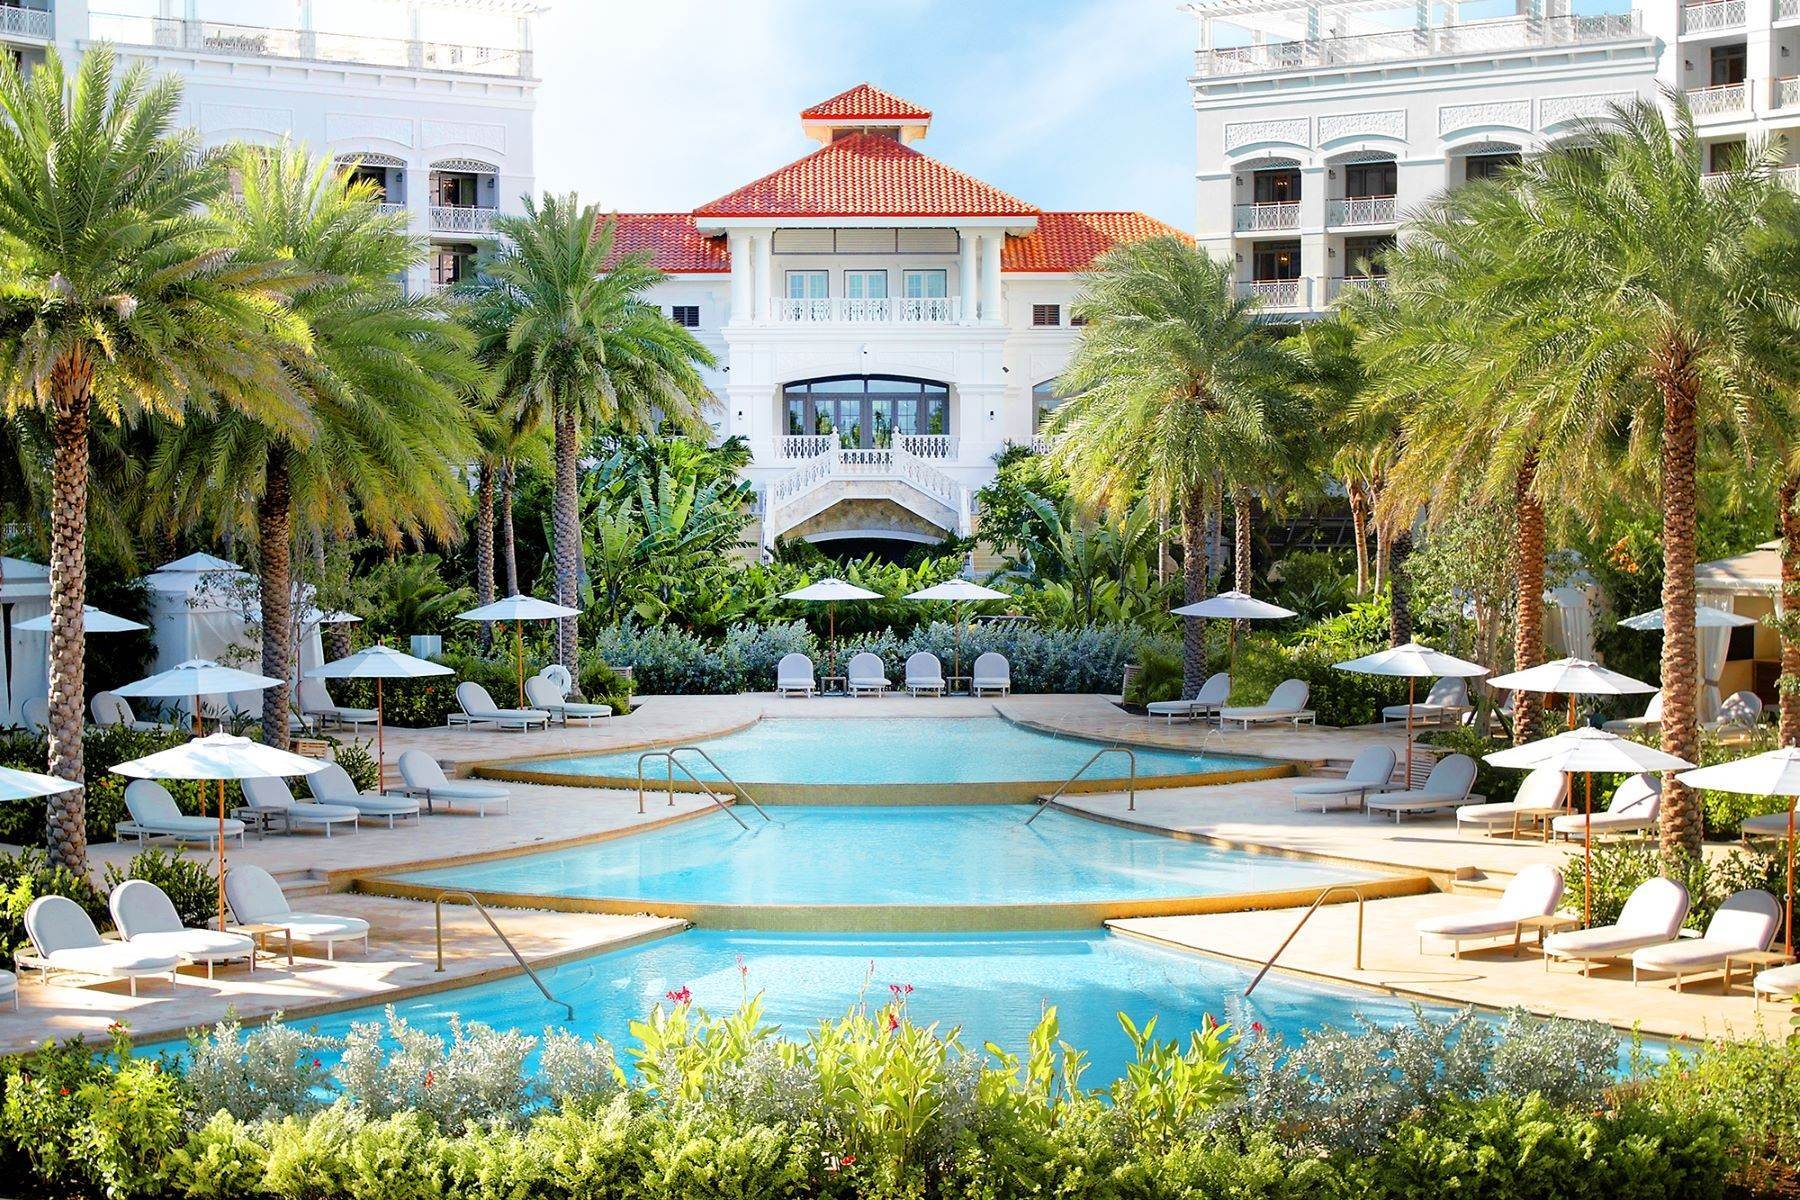 Property for Sale at Rosewood Two Bedroom, West Wing Residence Baha Mar, Cable Beach, Nassau and Paradise Island, Bahamas